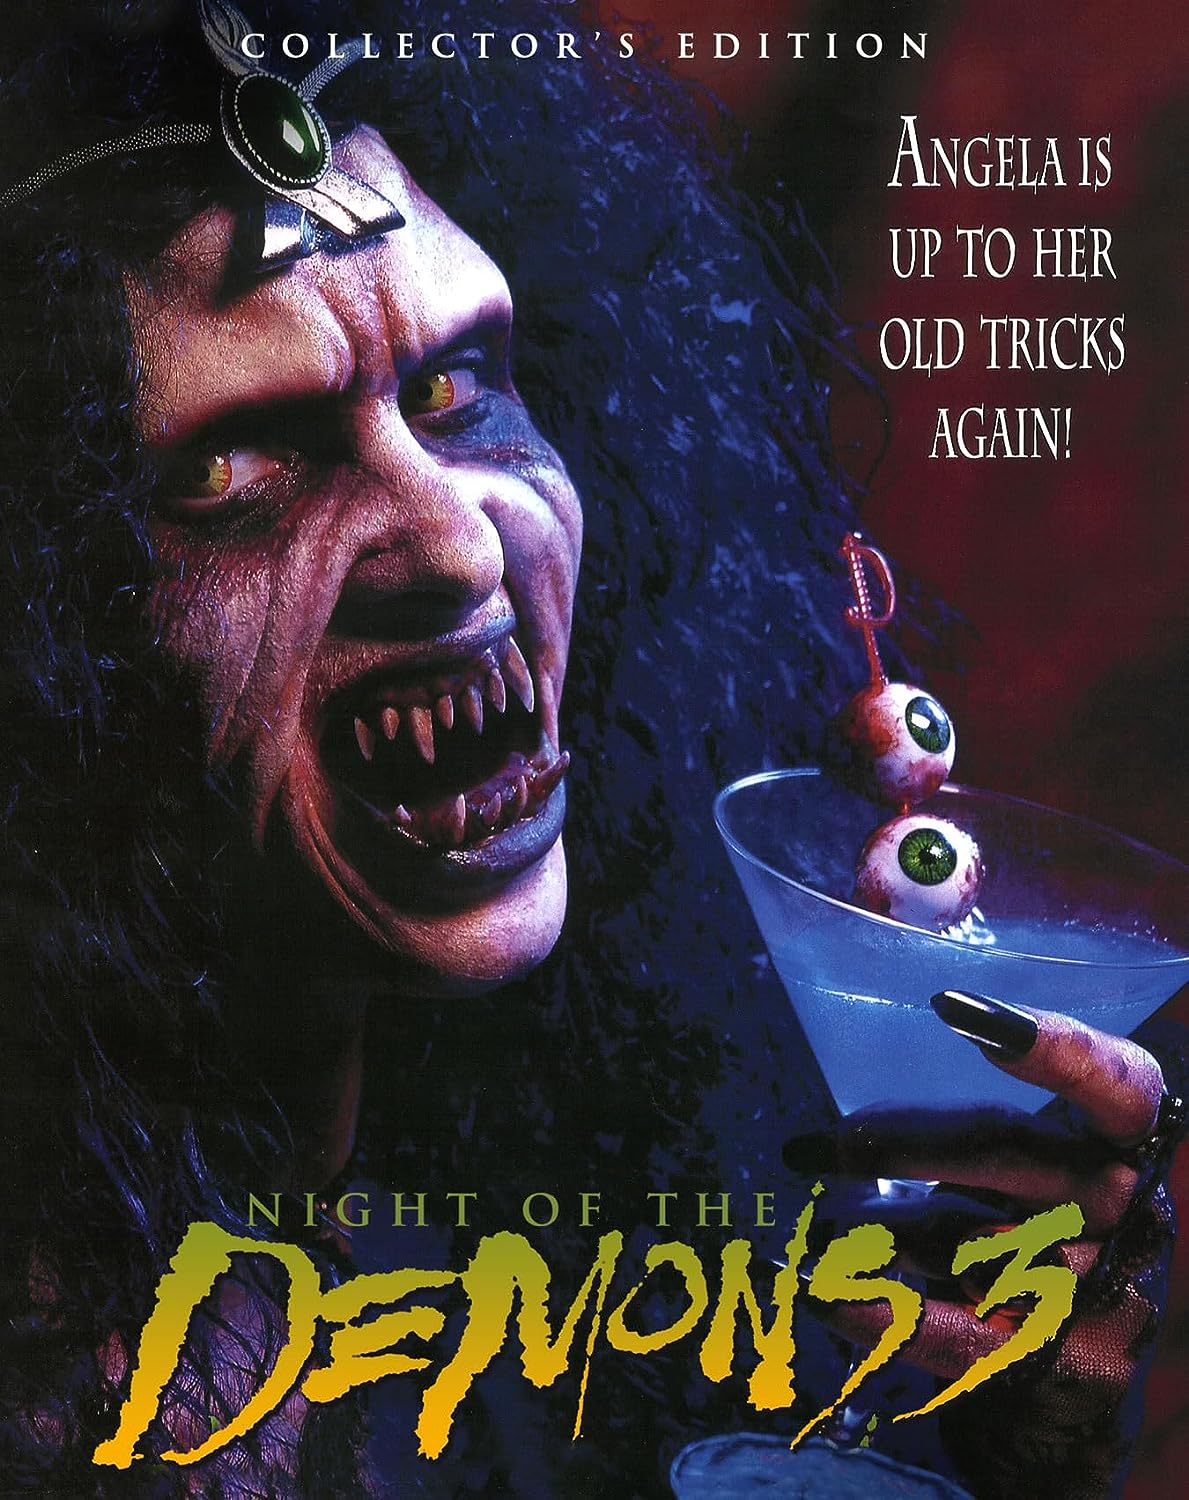 NIGHT OF THE DEMONS 3 (COLLECTOR'S EDITION) BLU-RAY